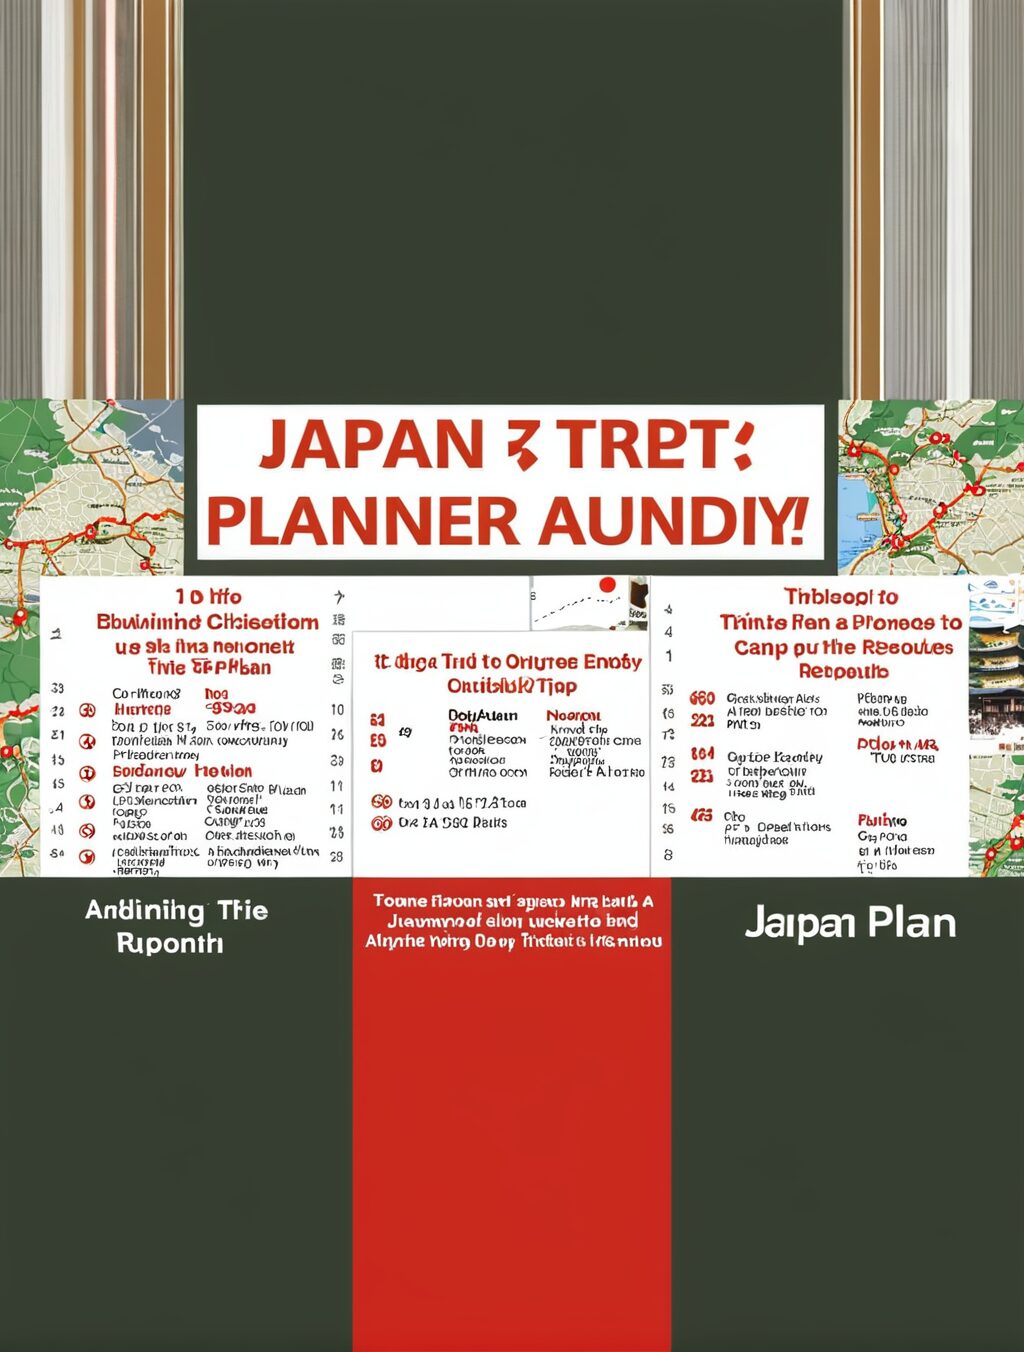 how to plan a trip to japan reddit